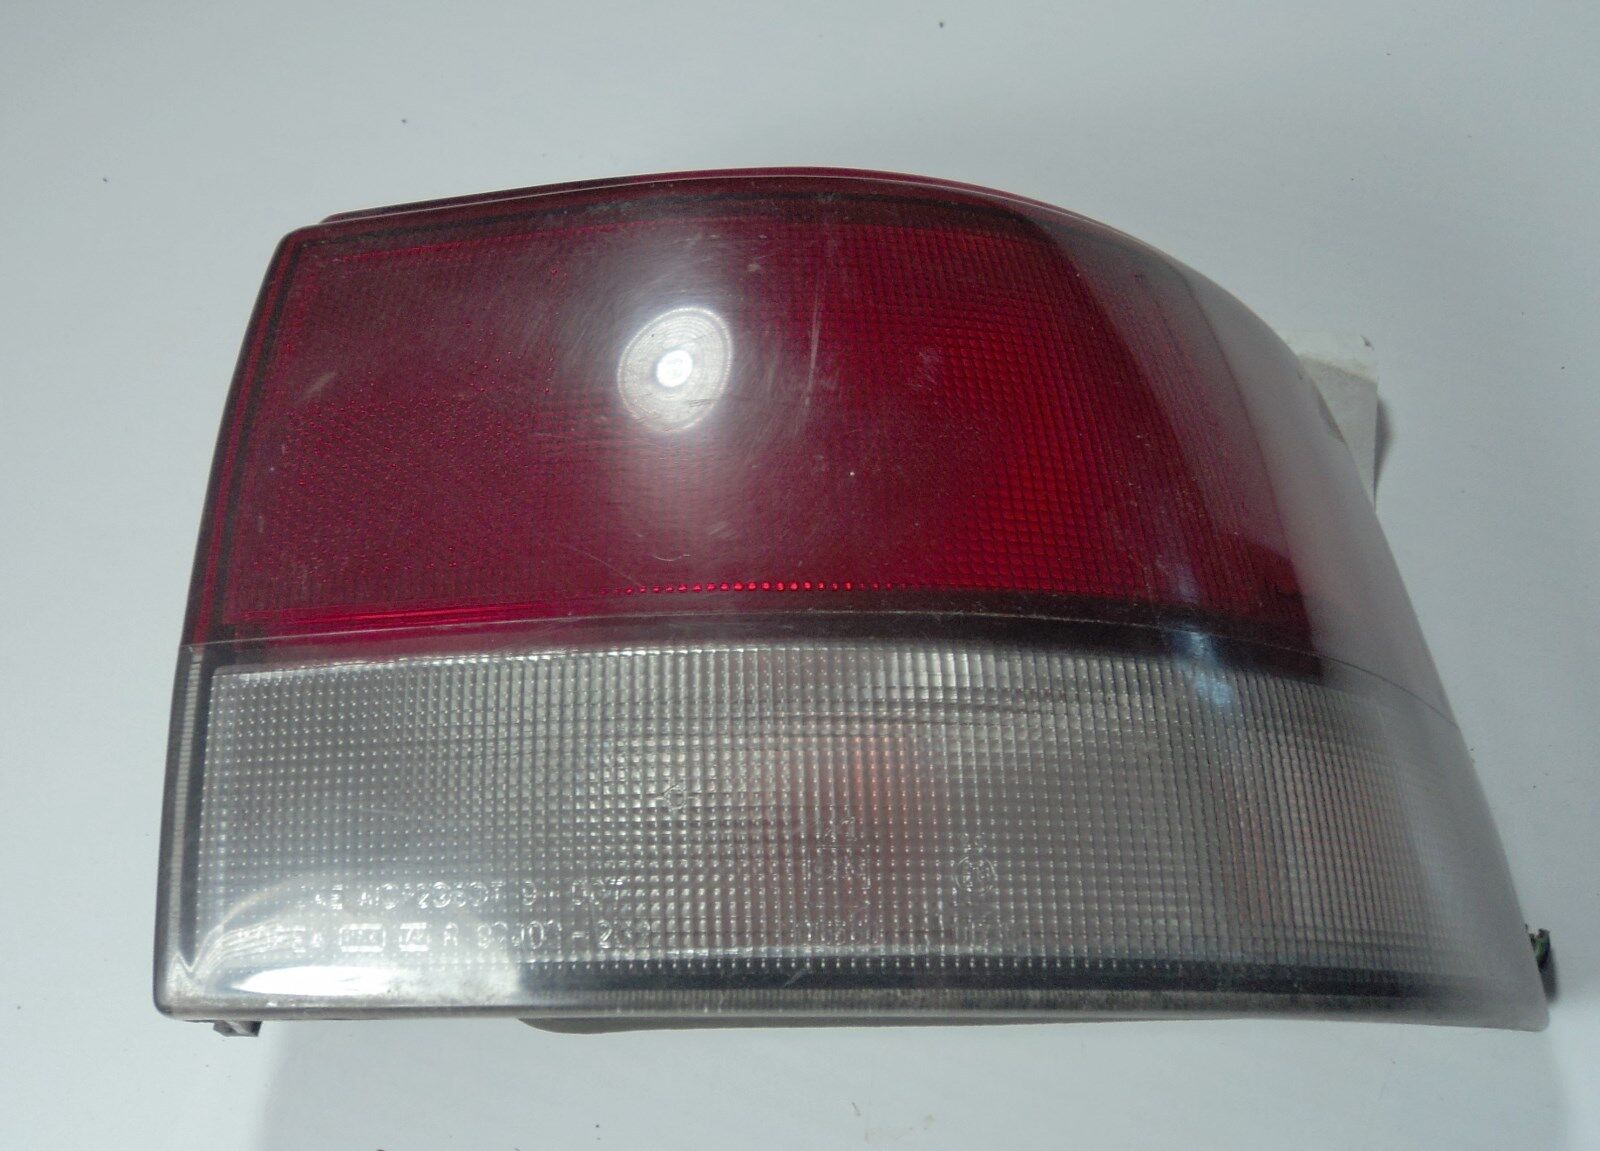 1993-1994 Hyundai Scoupe >< Taillight Assembly >< Right side - $25.21